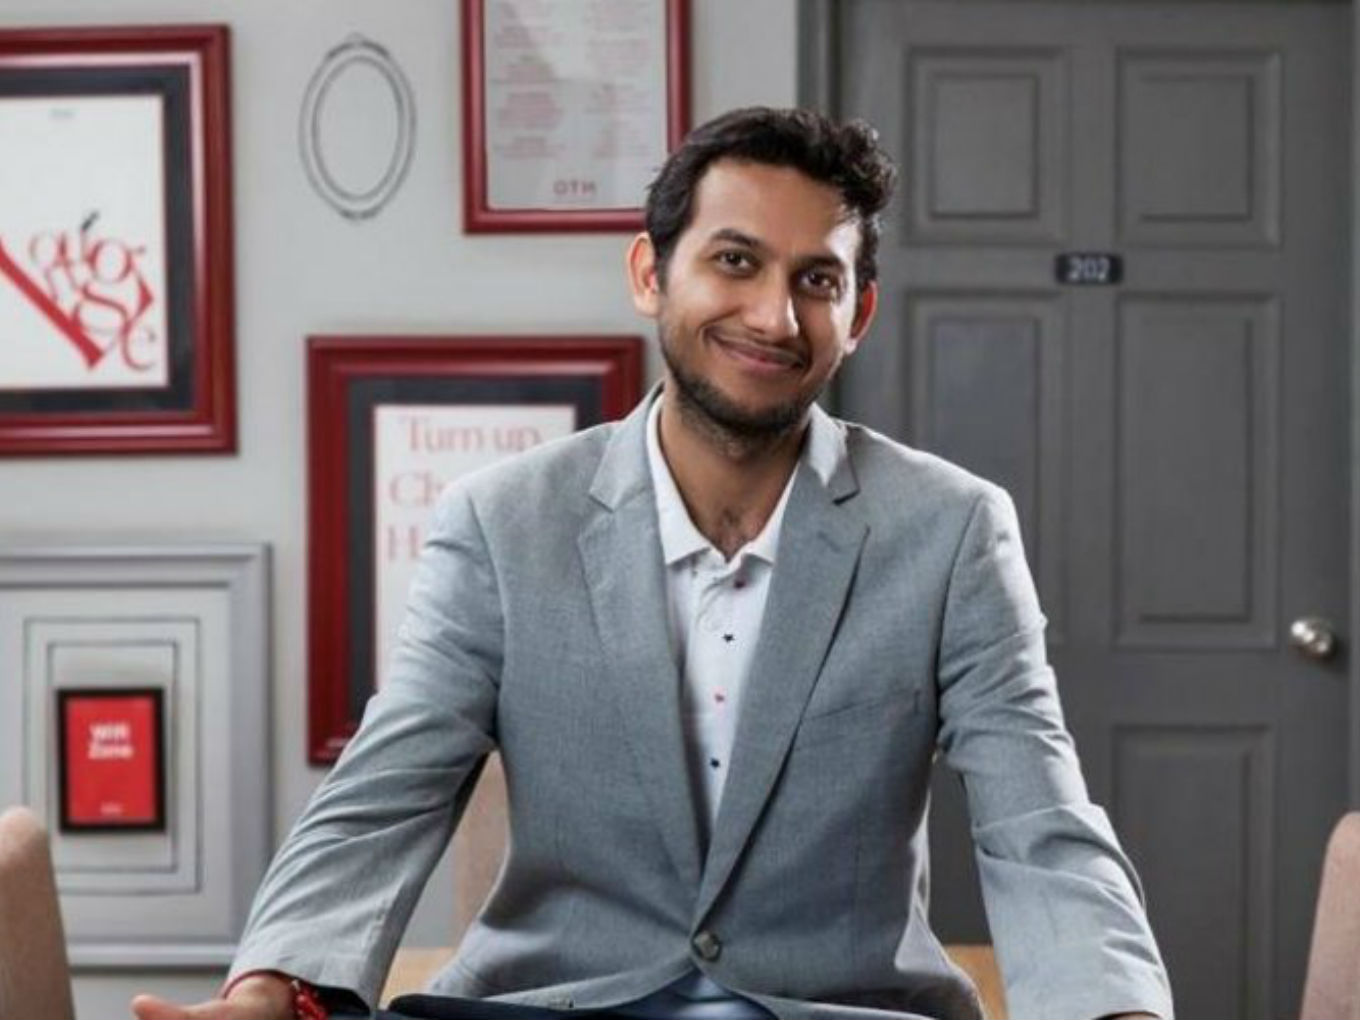 OYO Founder Ritesh Agarwal To Provide Grants To Four Ladakh-Based Startups - Inc42 (Picture 1)